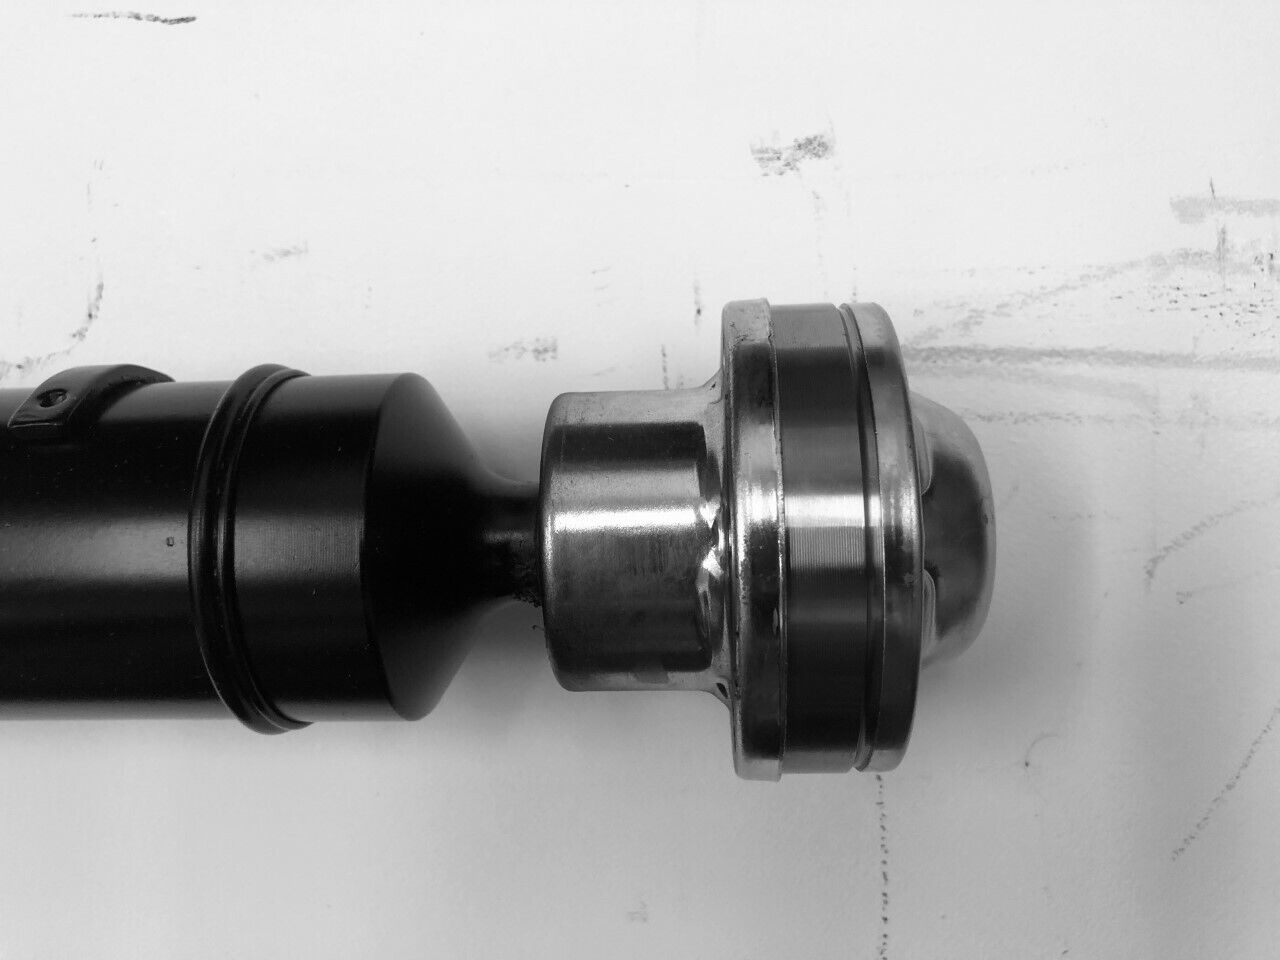 VOLVO-XC90-Propshaft-New-Replaces-OE-Part-30783345-175644354387-4